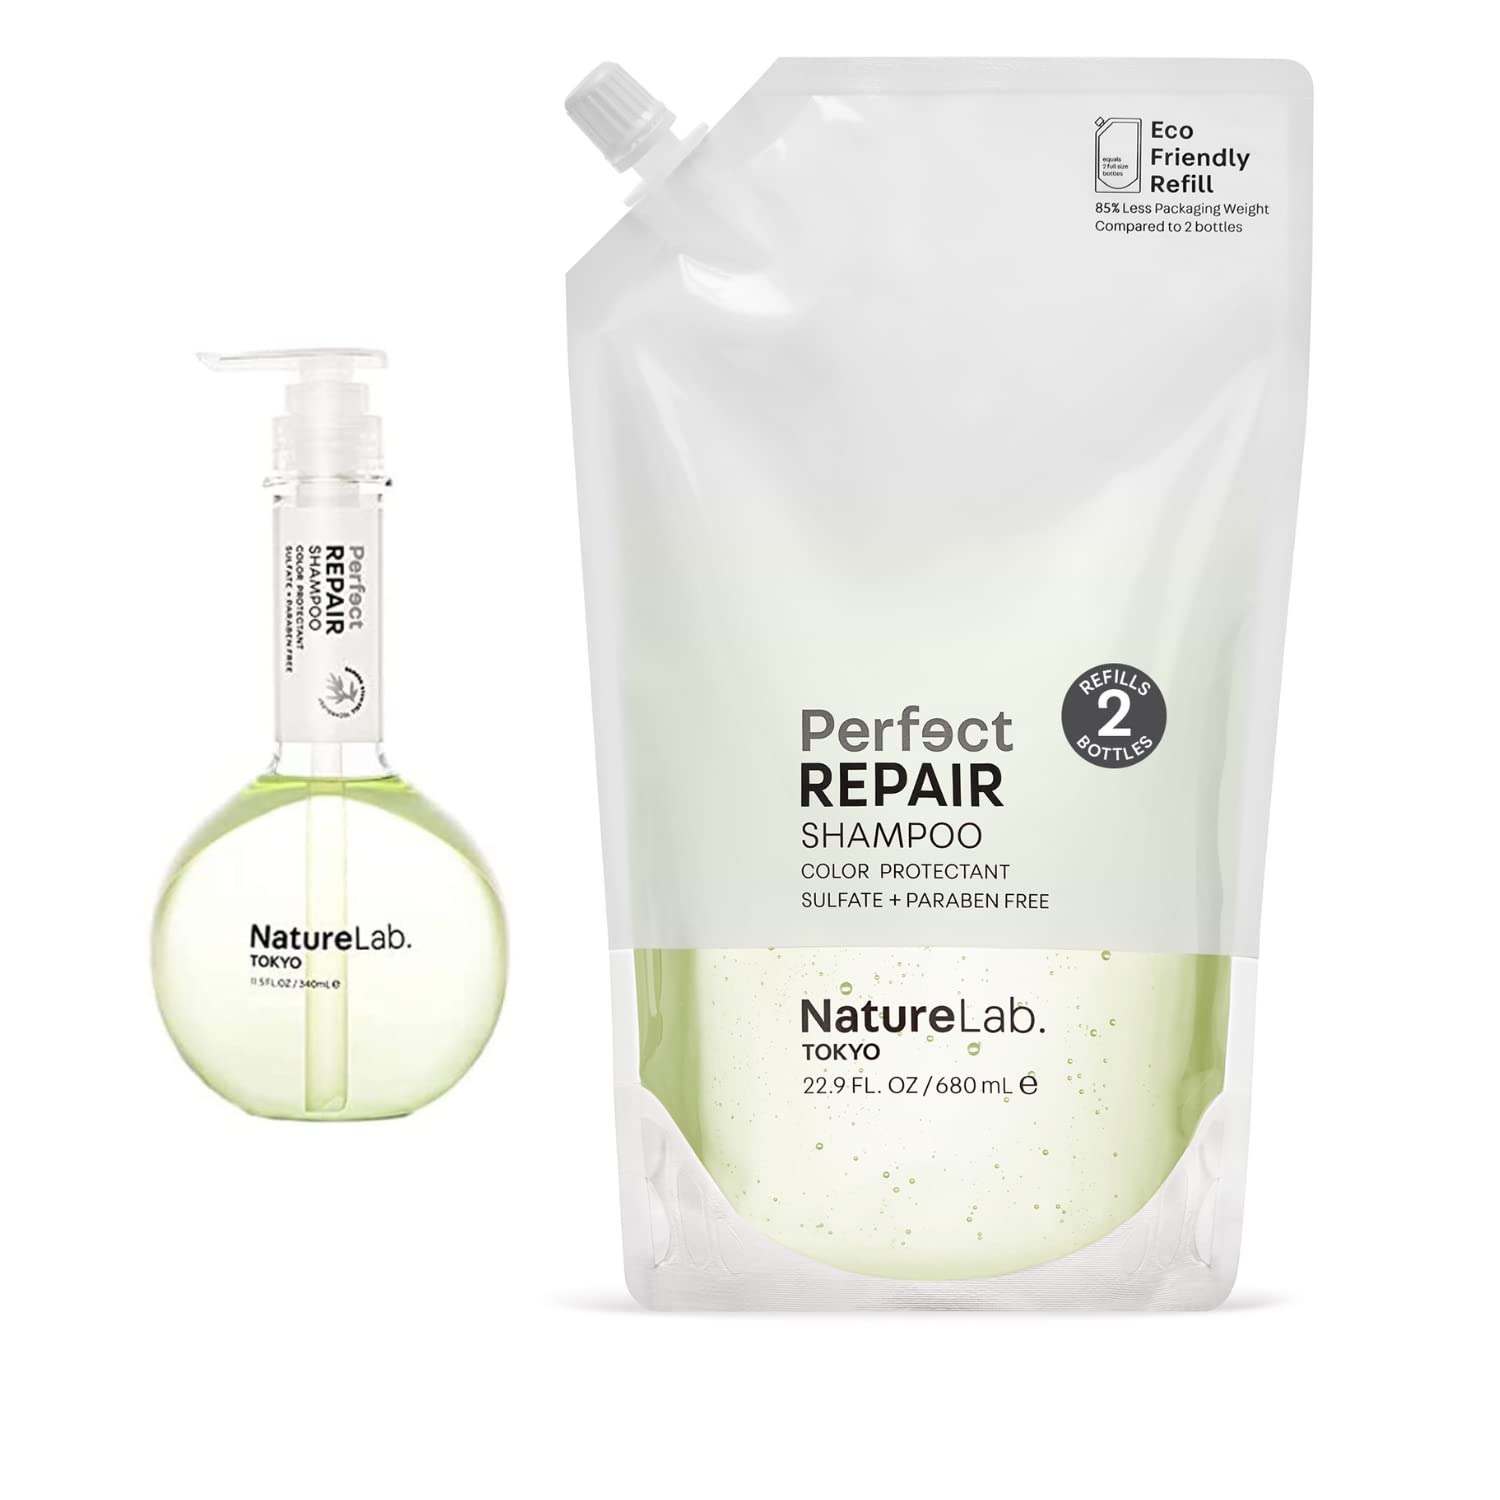 NatureLab TOKYO Perfect Repair Shampoo + Eco-Friendly Refill Pouch Bundle | Replenish and Restore Damaged, Color Treated Hair and Strengthen Hair | 11.5   & Refill 22.9   | $38 VALUE